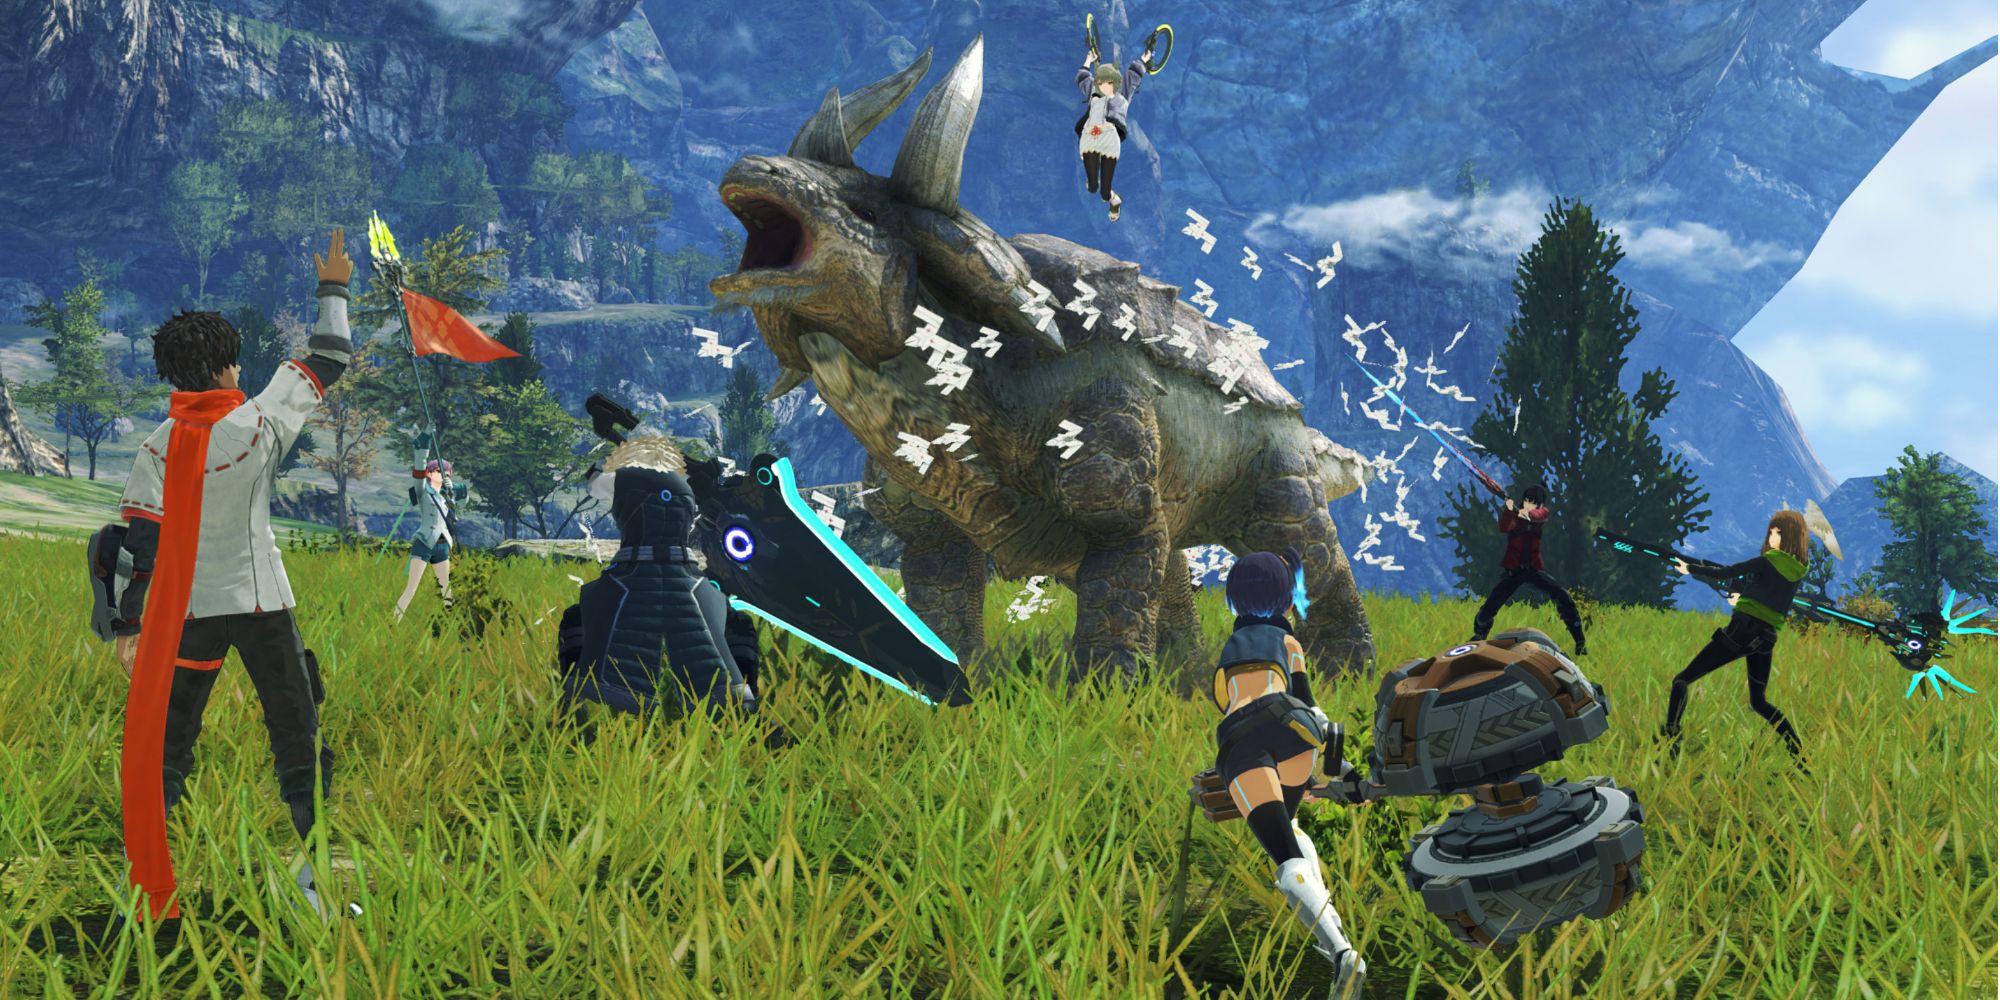 Everything we learned from the Xenoblade Chronicles 3 Direct, including its game world, combat mechanics, DLC plans, and amiibo functionality.